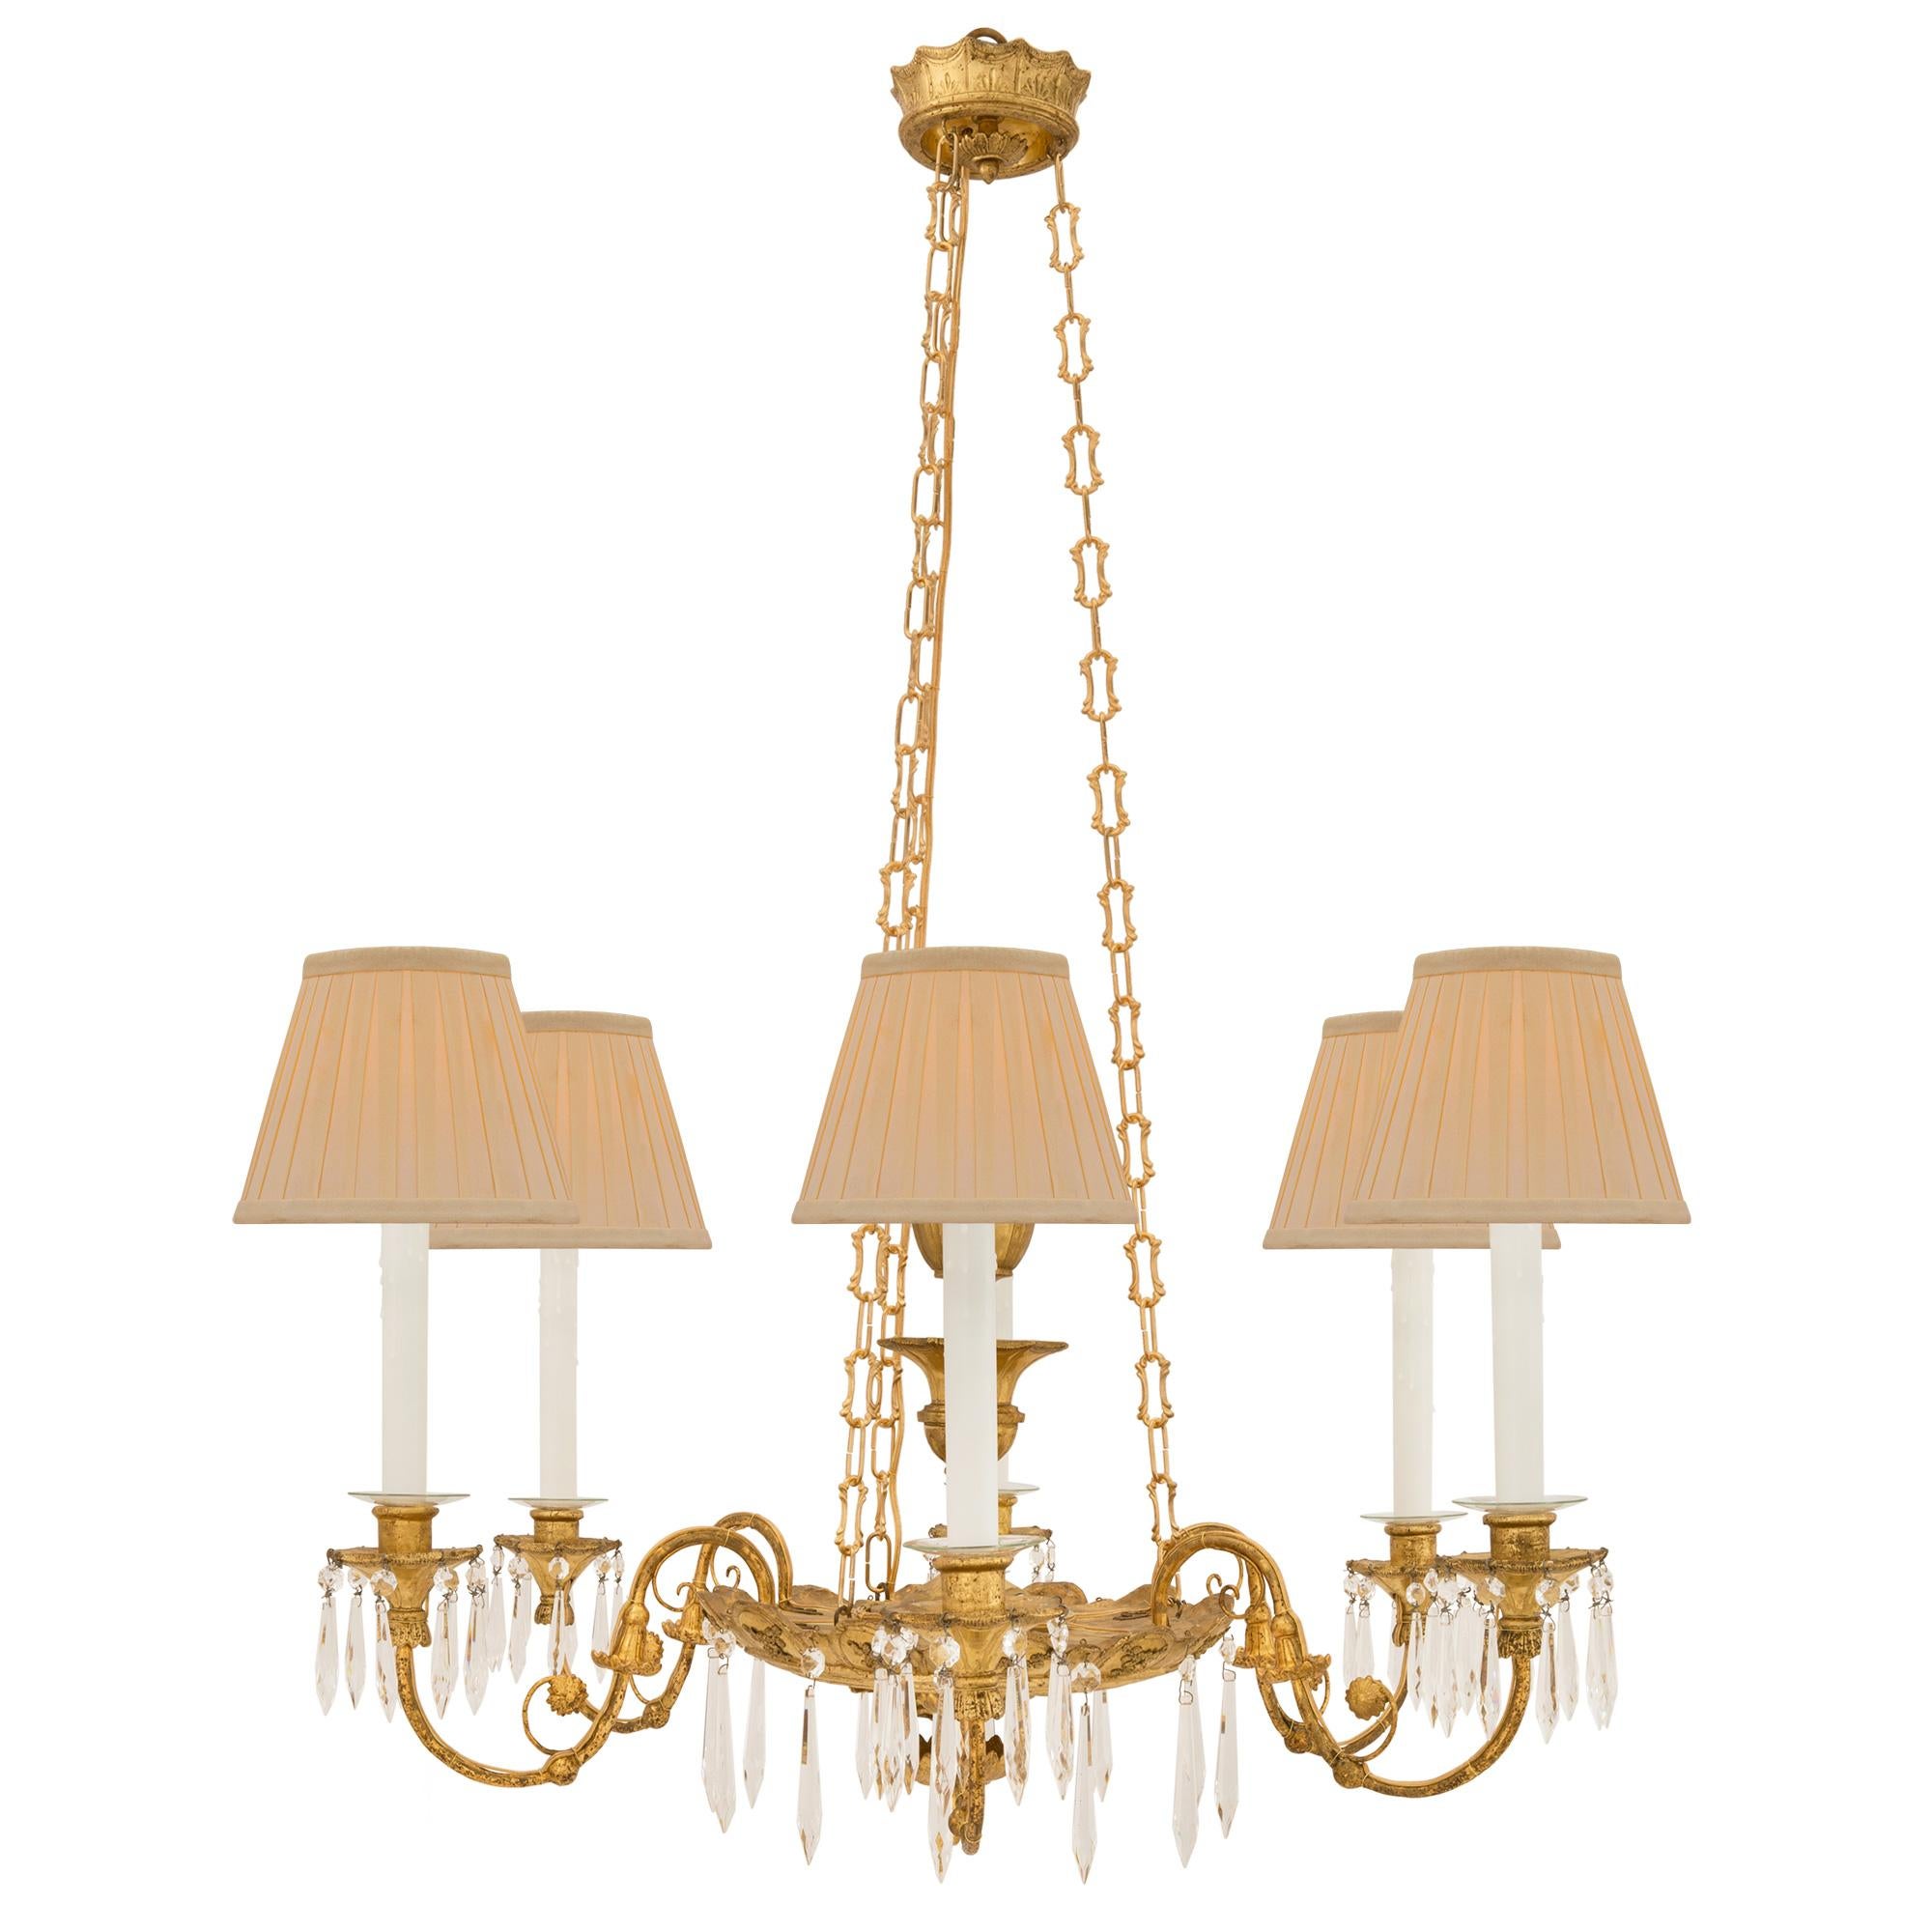 A beautiful Italian 19th century neo-classical st. giltwood and ormolu chandelier. The six arm chandelier is centered by a lovely bottom finial amidst finely carved foliate designs and intricately detailed palmettes. Each elegantly scrolled arm is